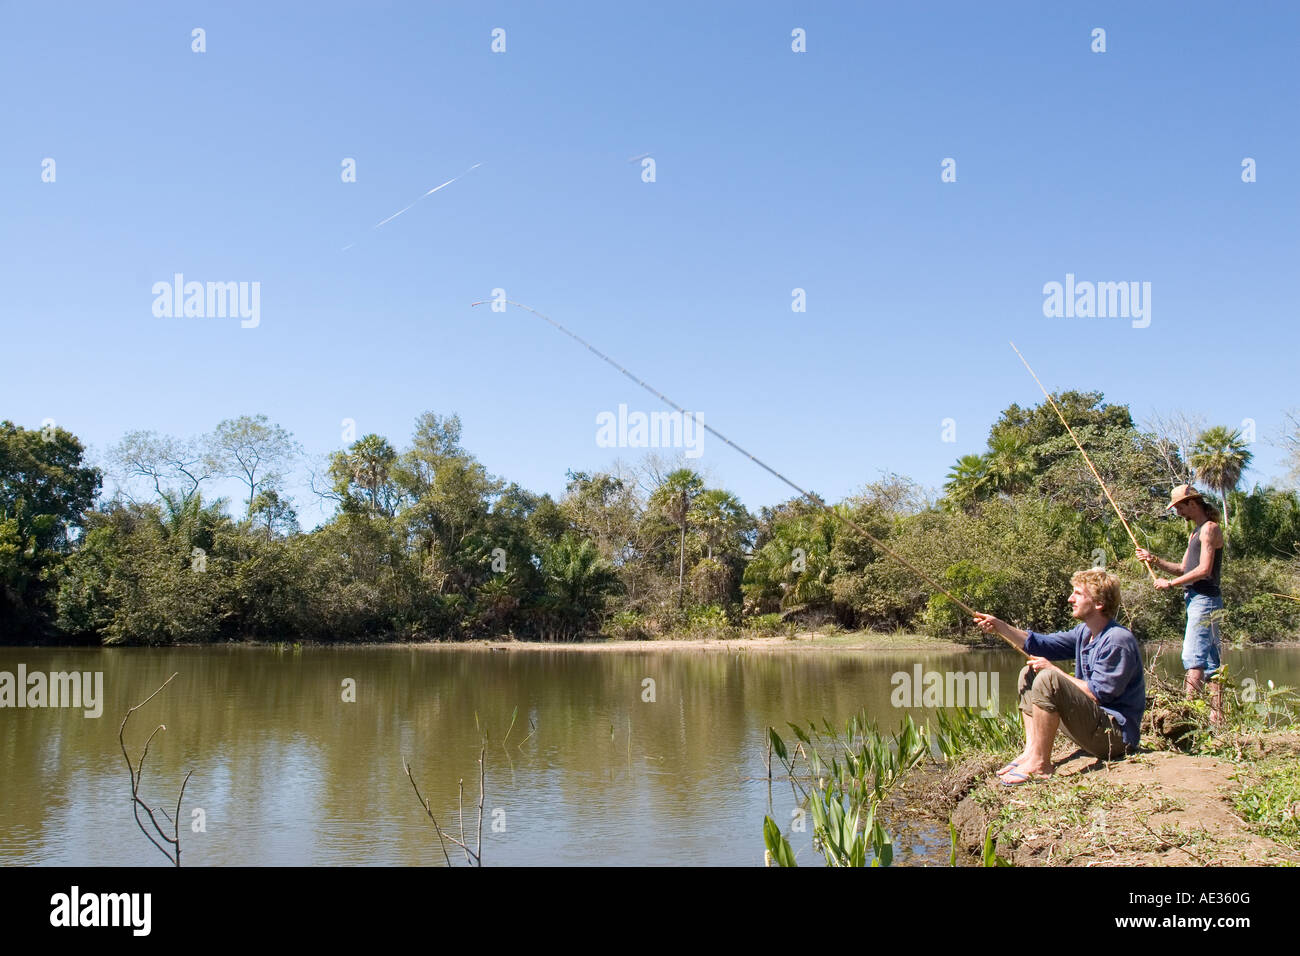 Two Male Figures Fishing in Lake in the Pantanal, Brazil Stock Photo